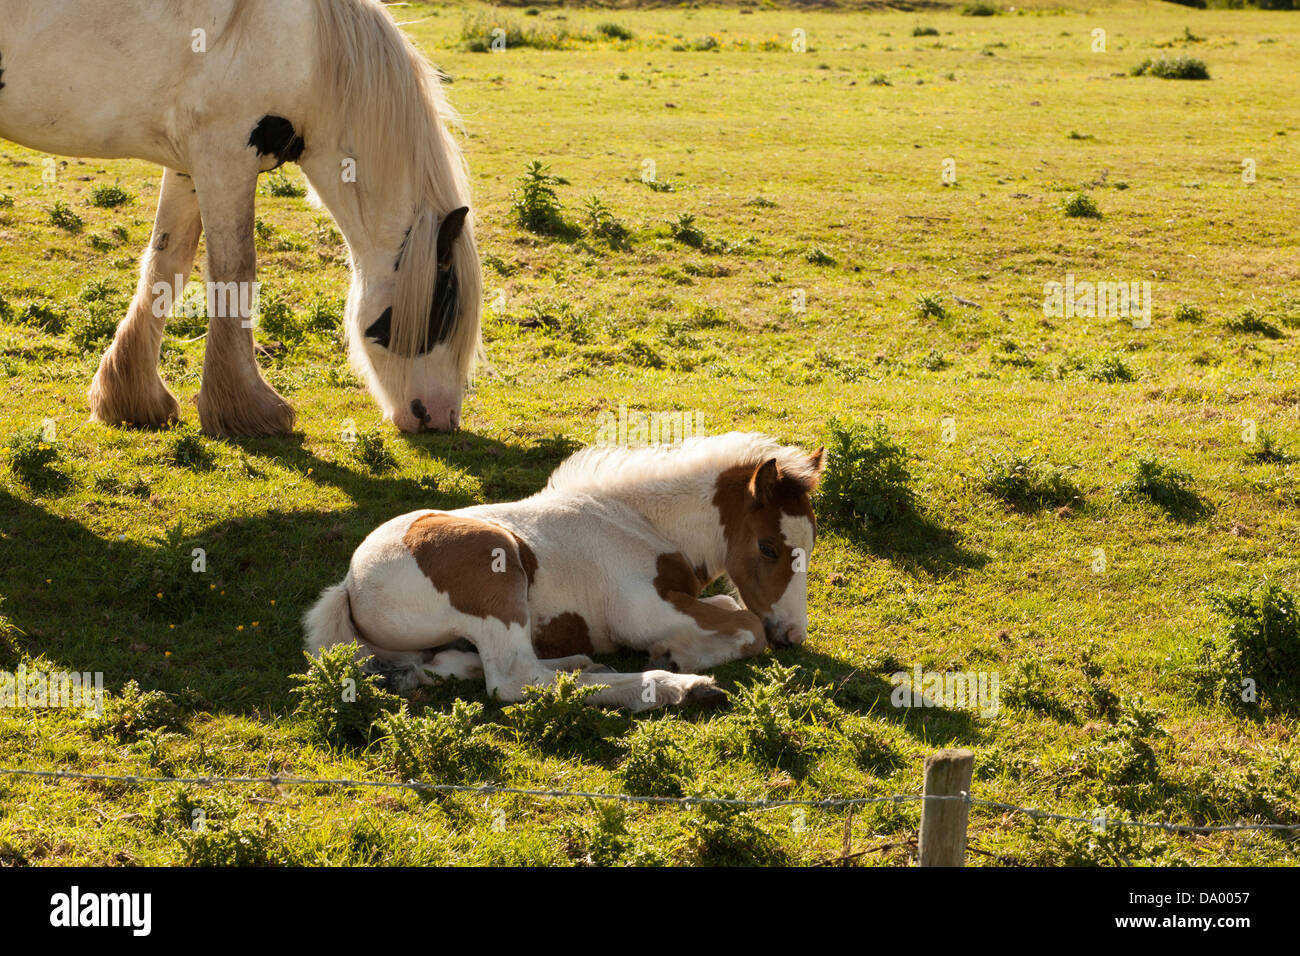 Shire horse mare with foal Stock Photo